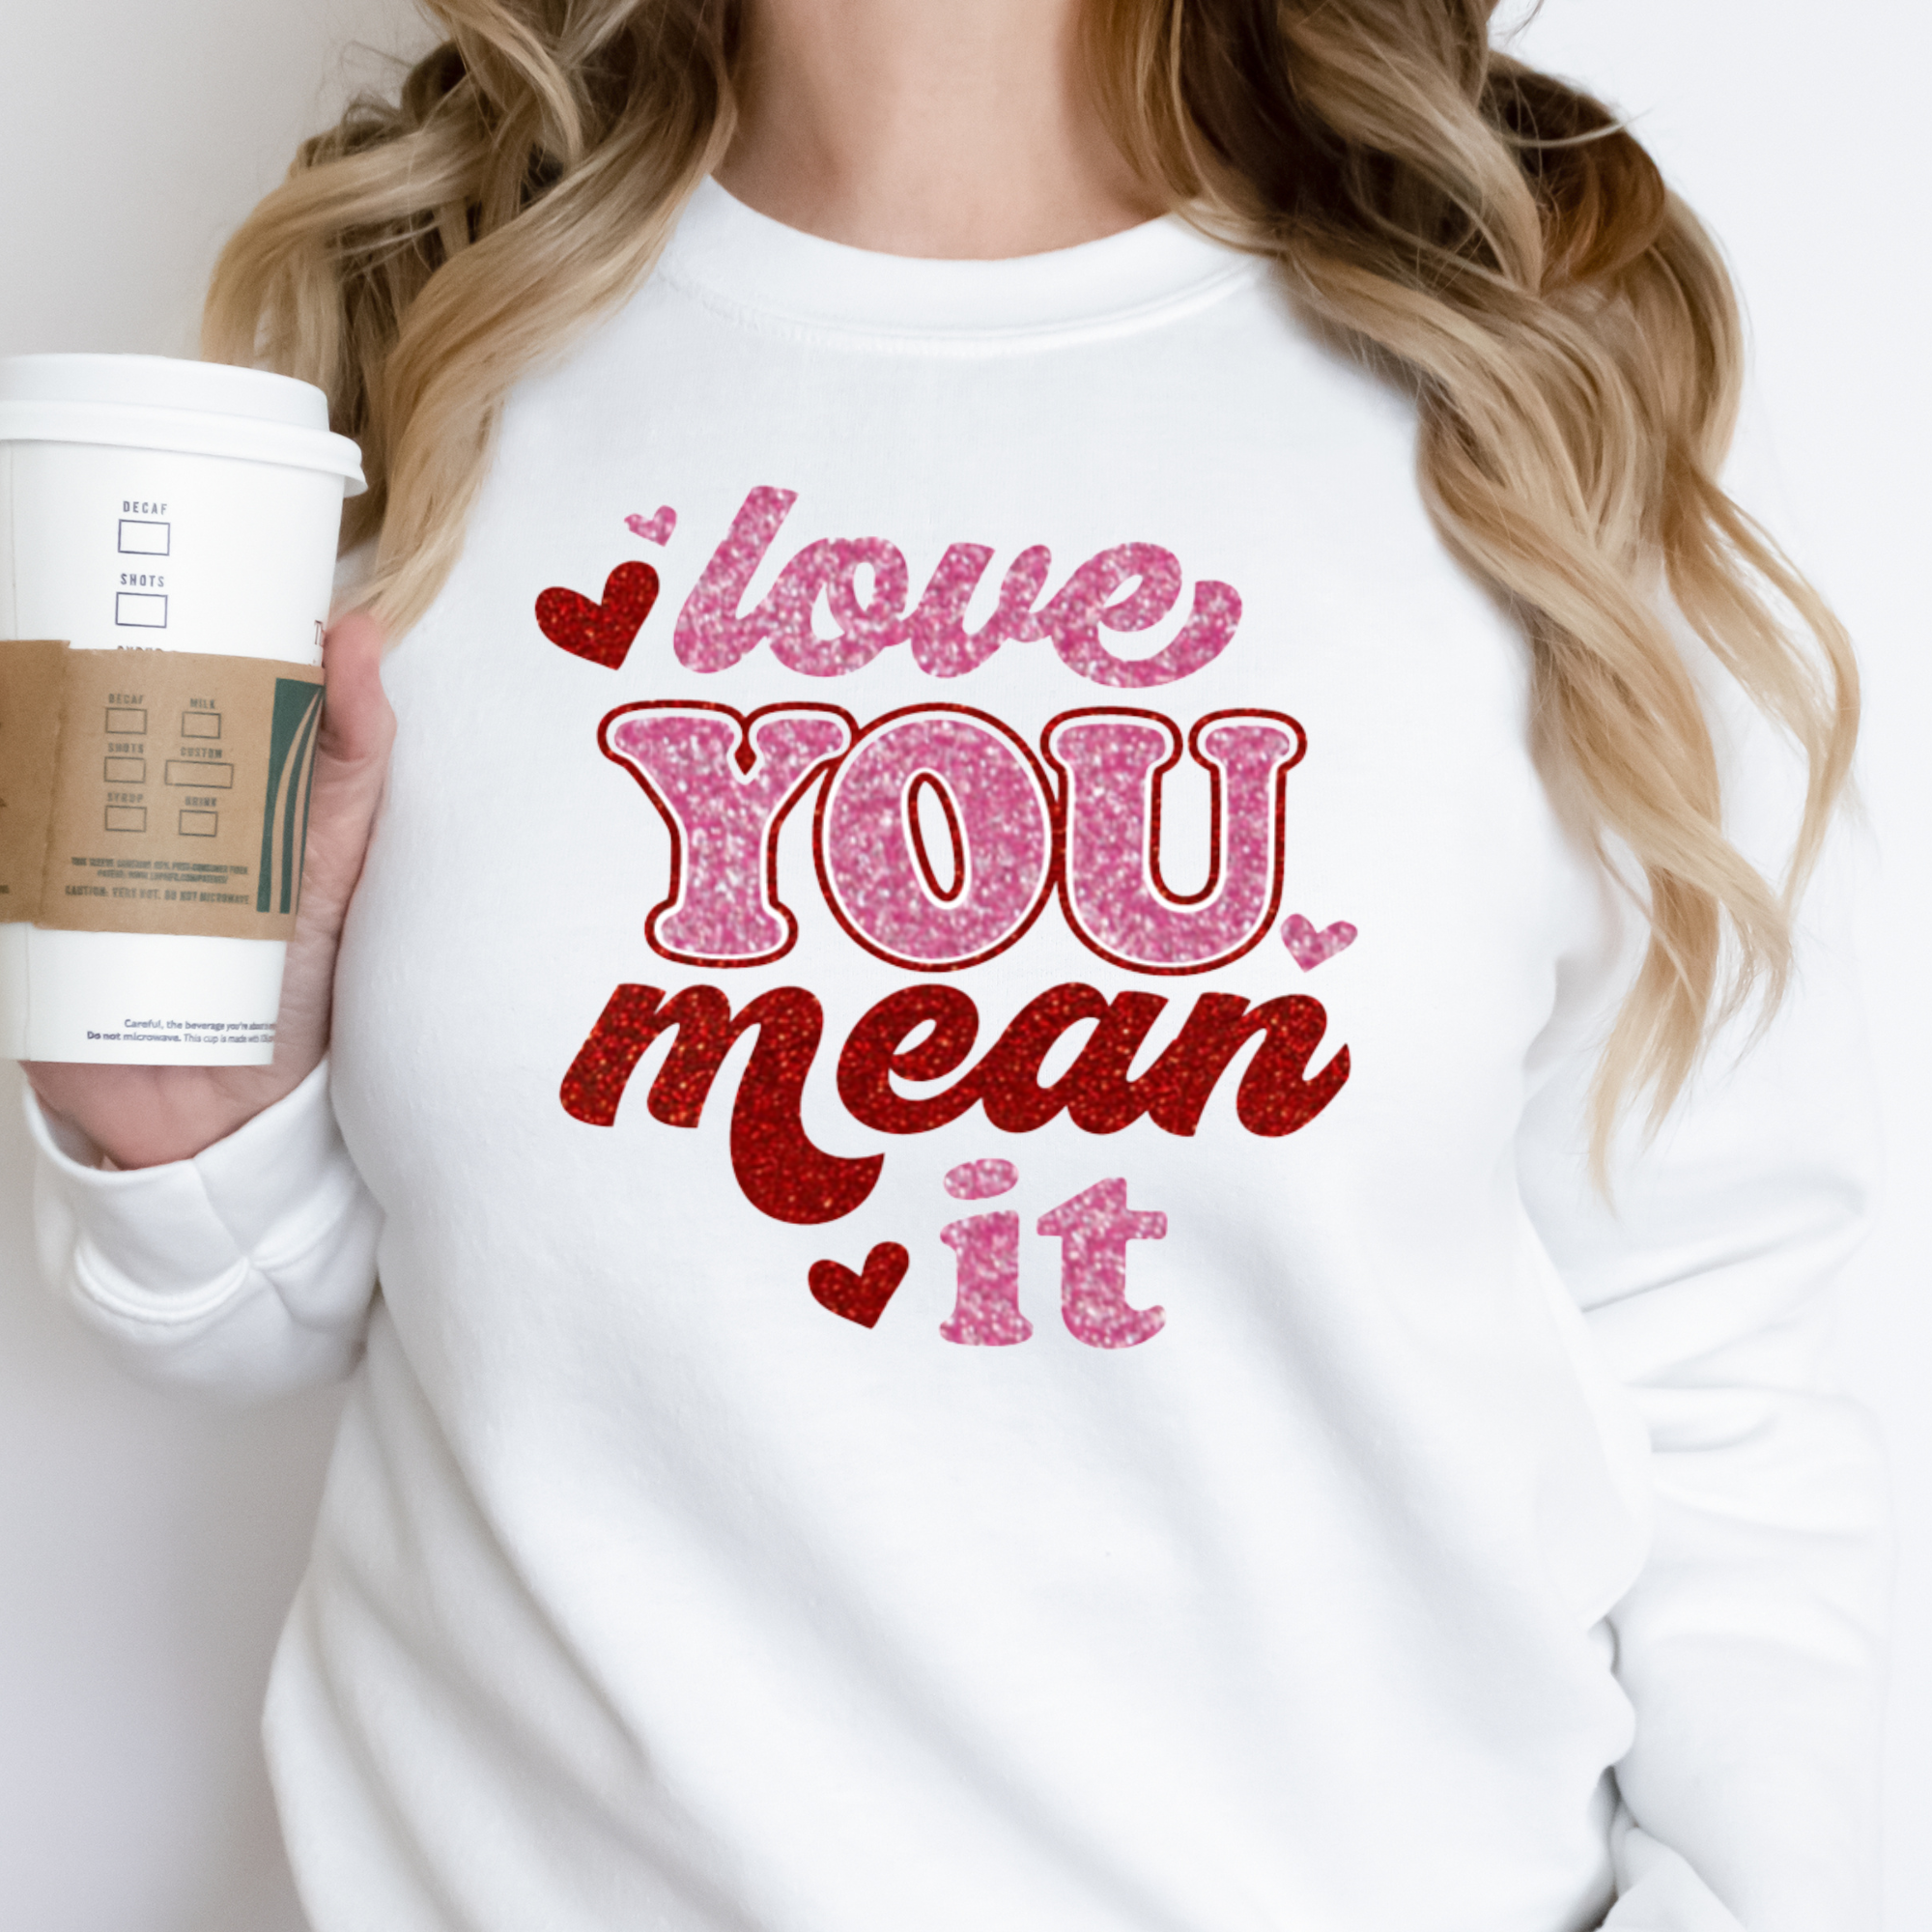 Love You Mean It Shirt